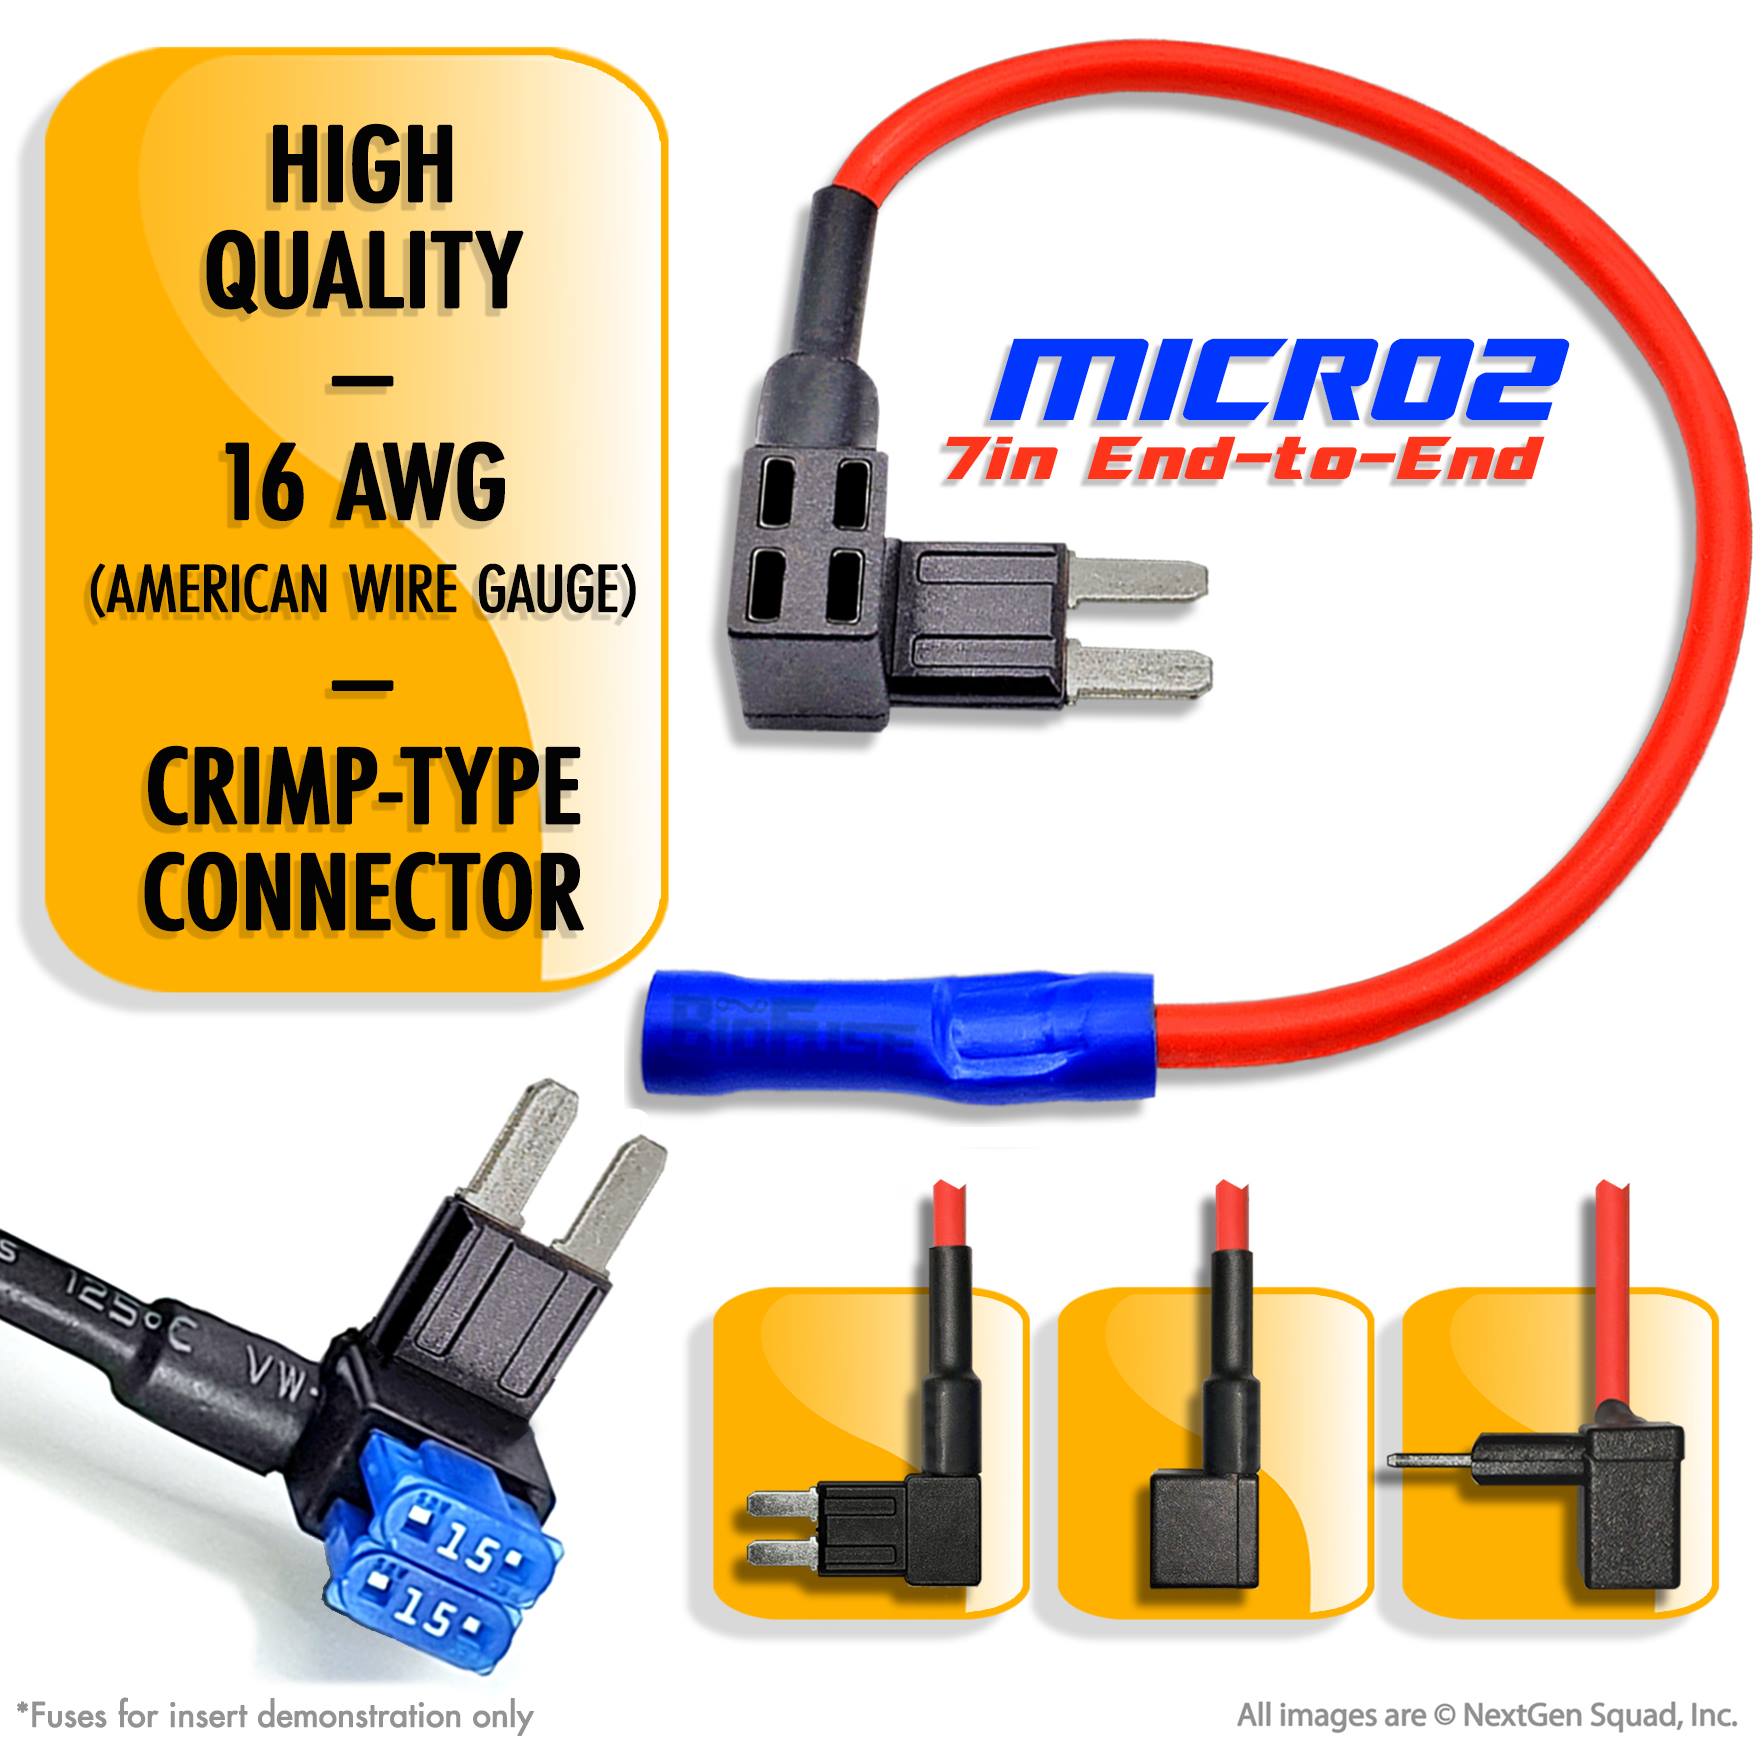 Add-a-Circuit Micro 10A fuse adapter - Dashcamdeal